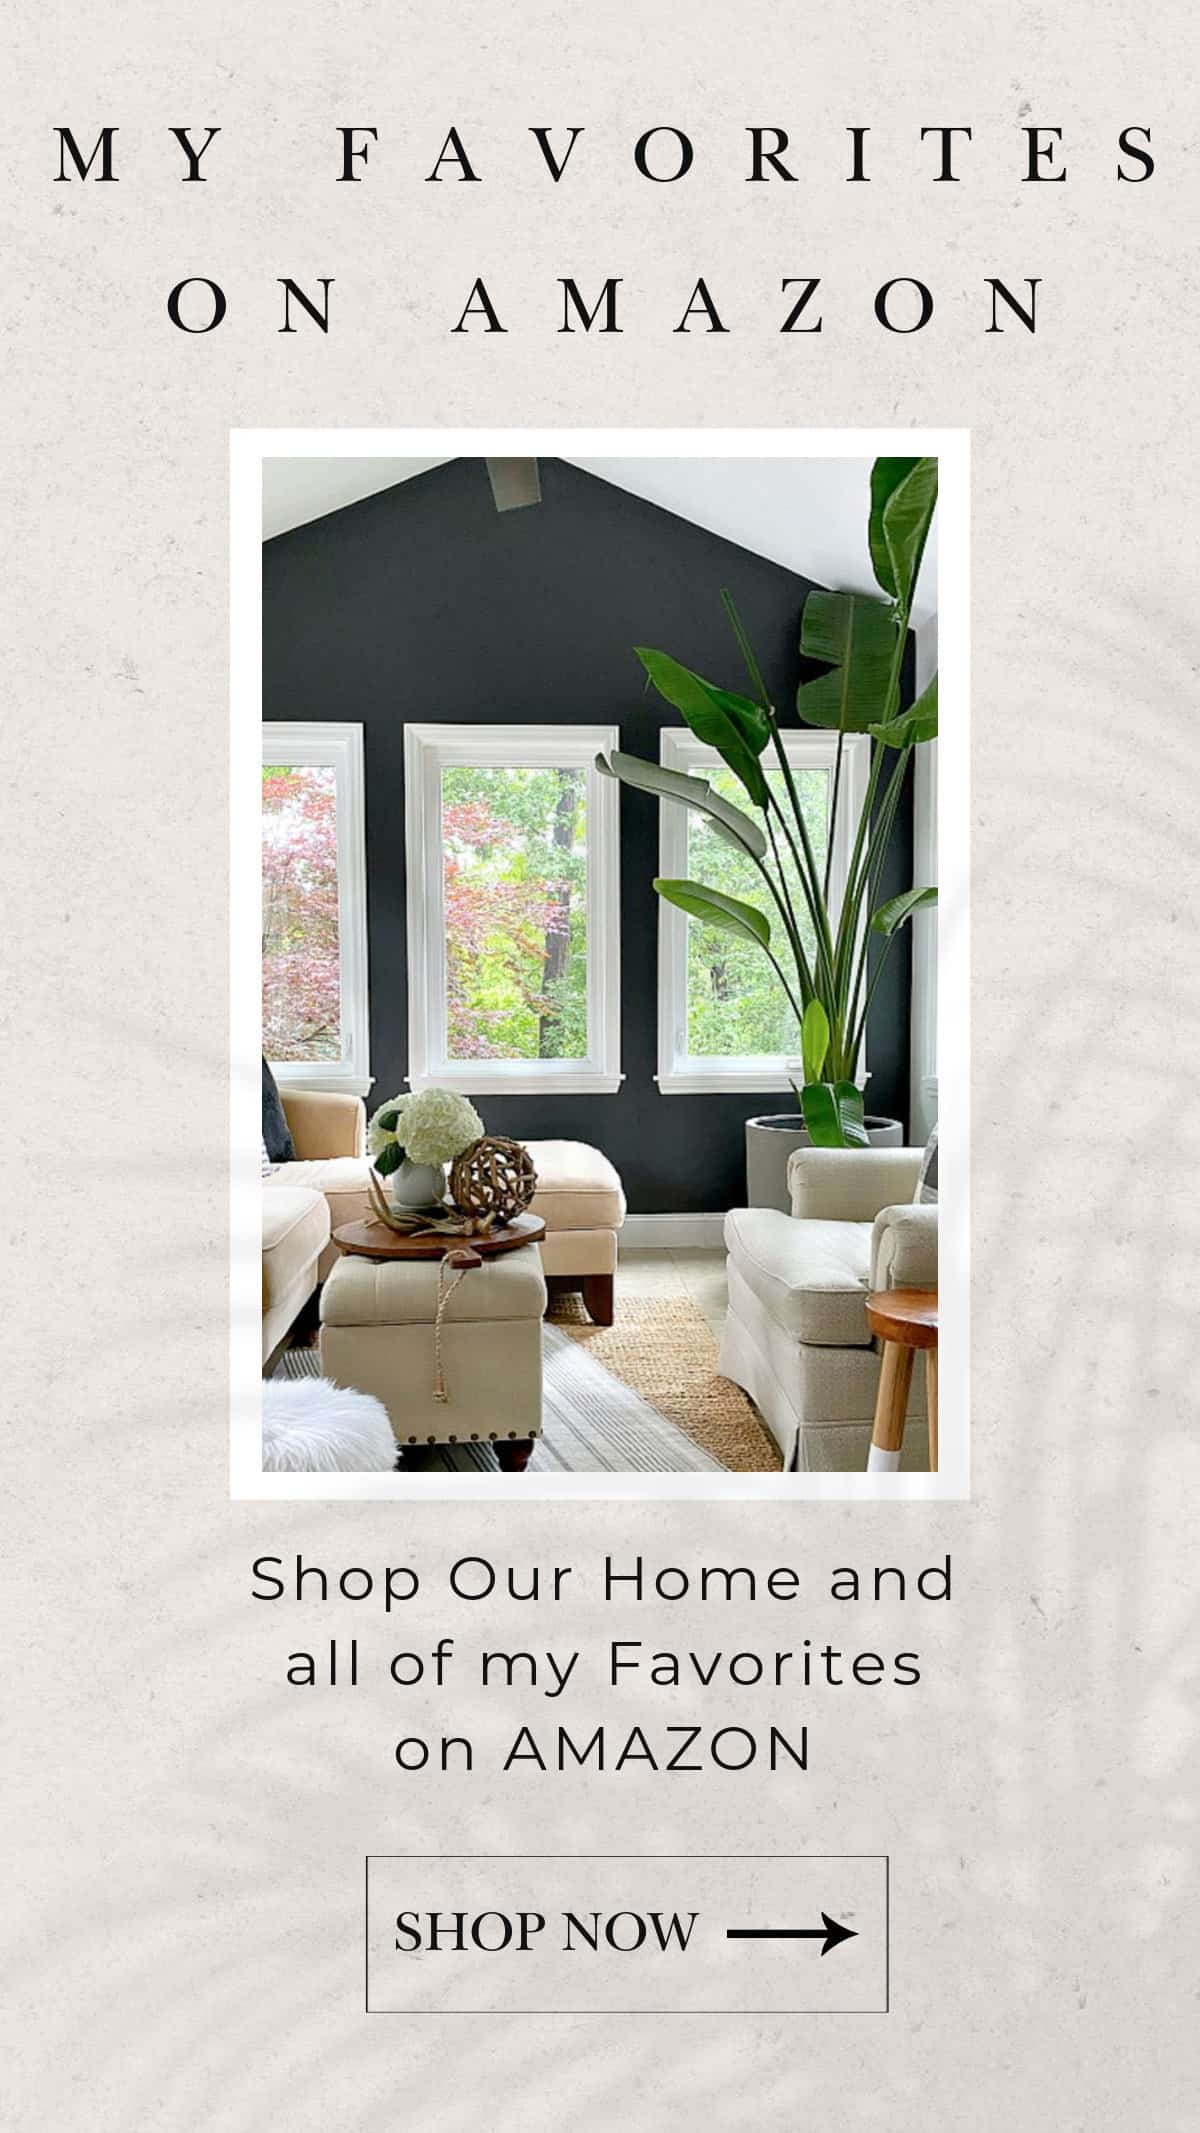 graphic for Amazon and image of small sunroom